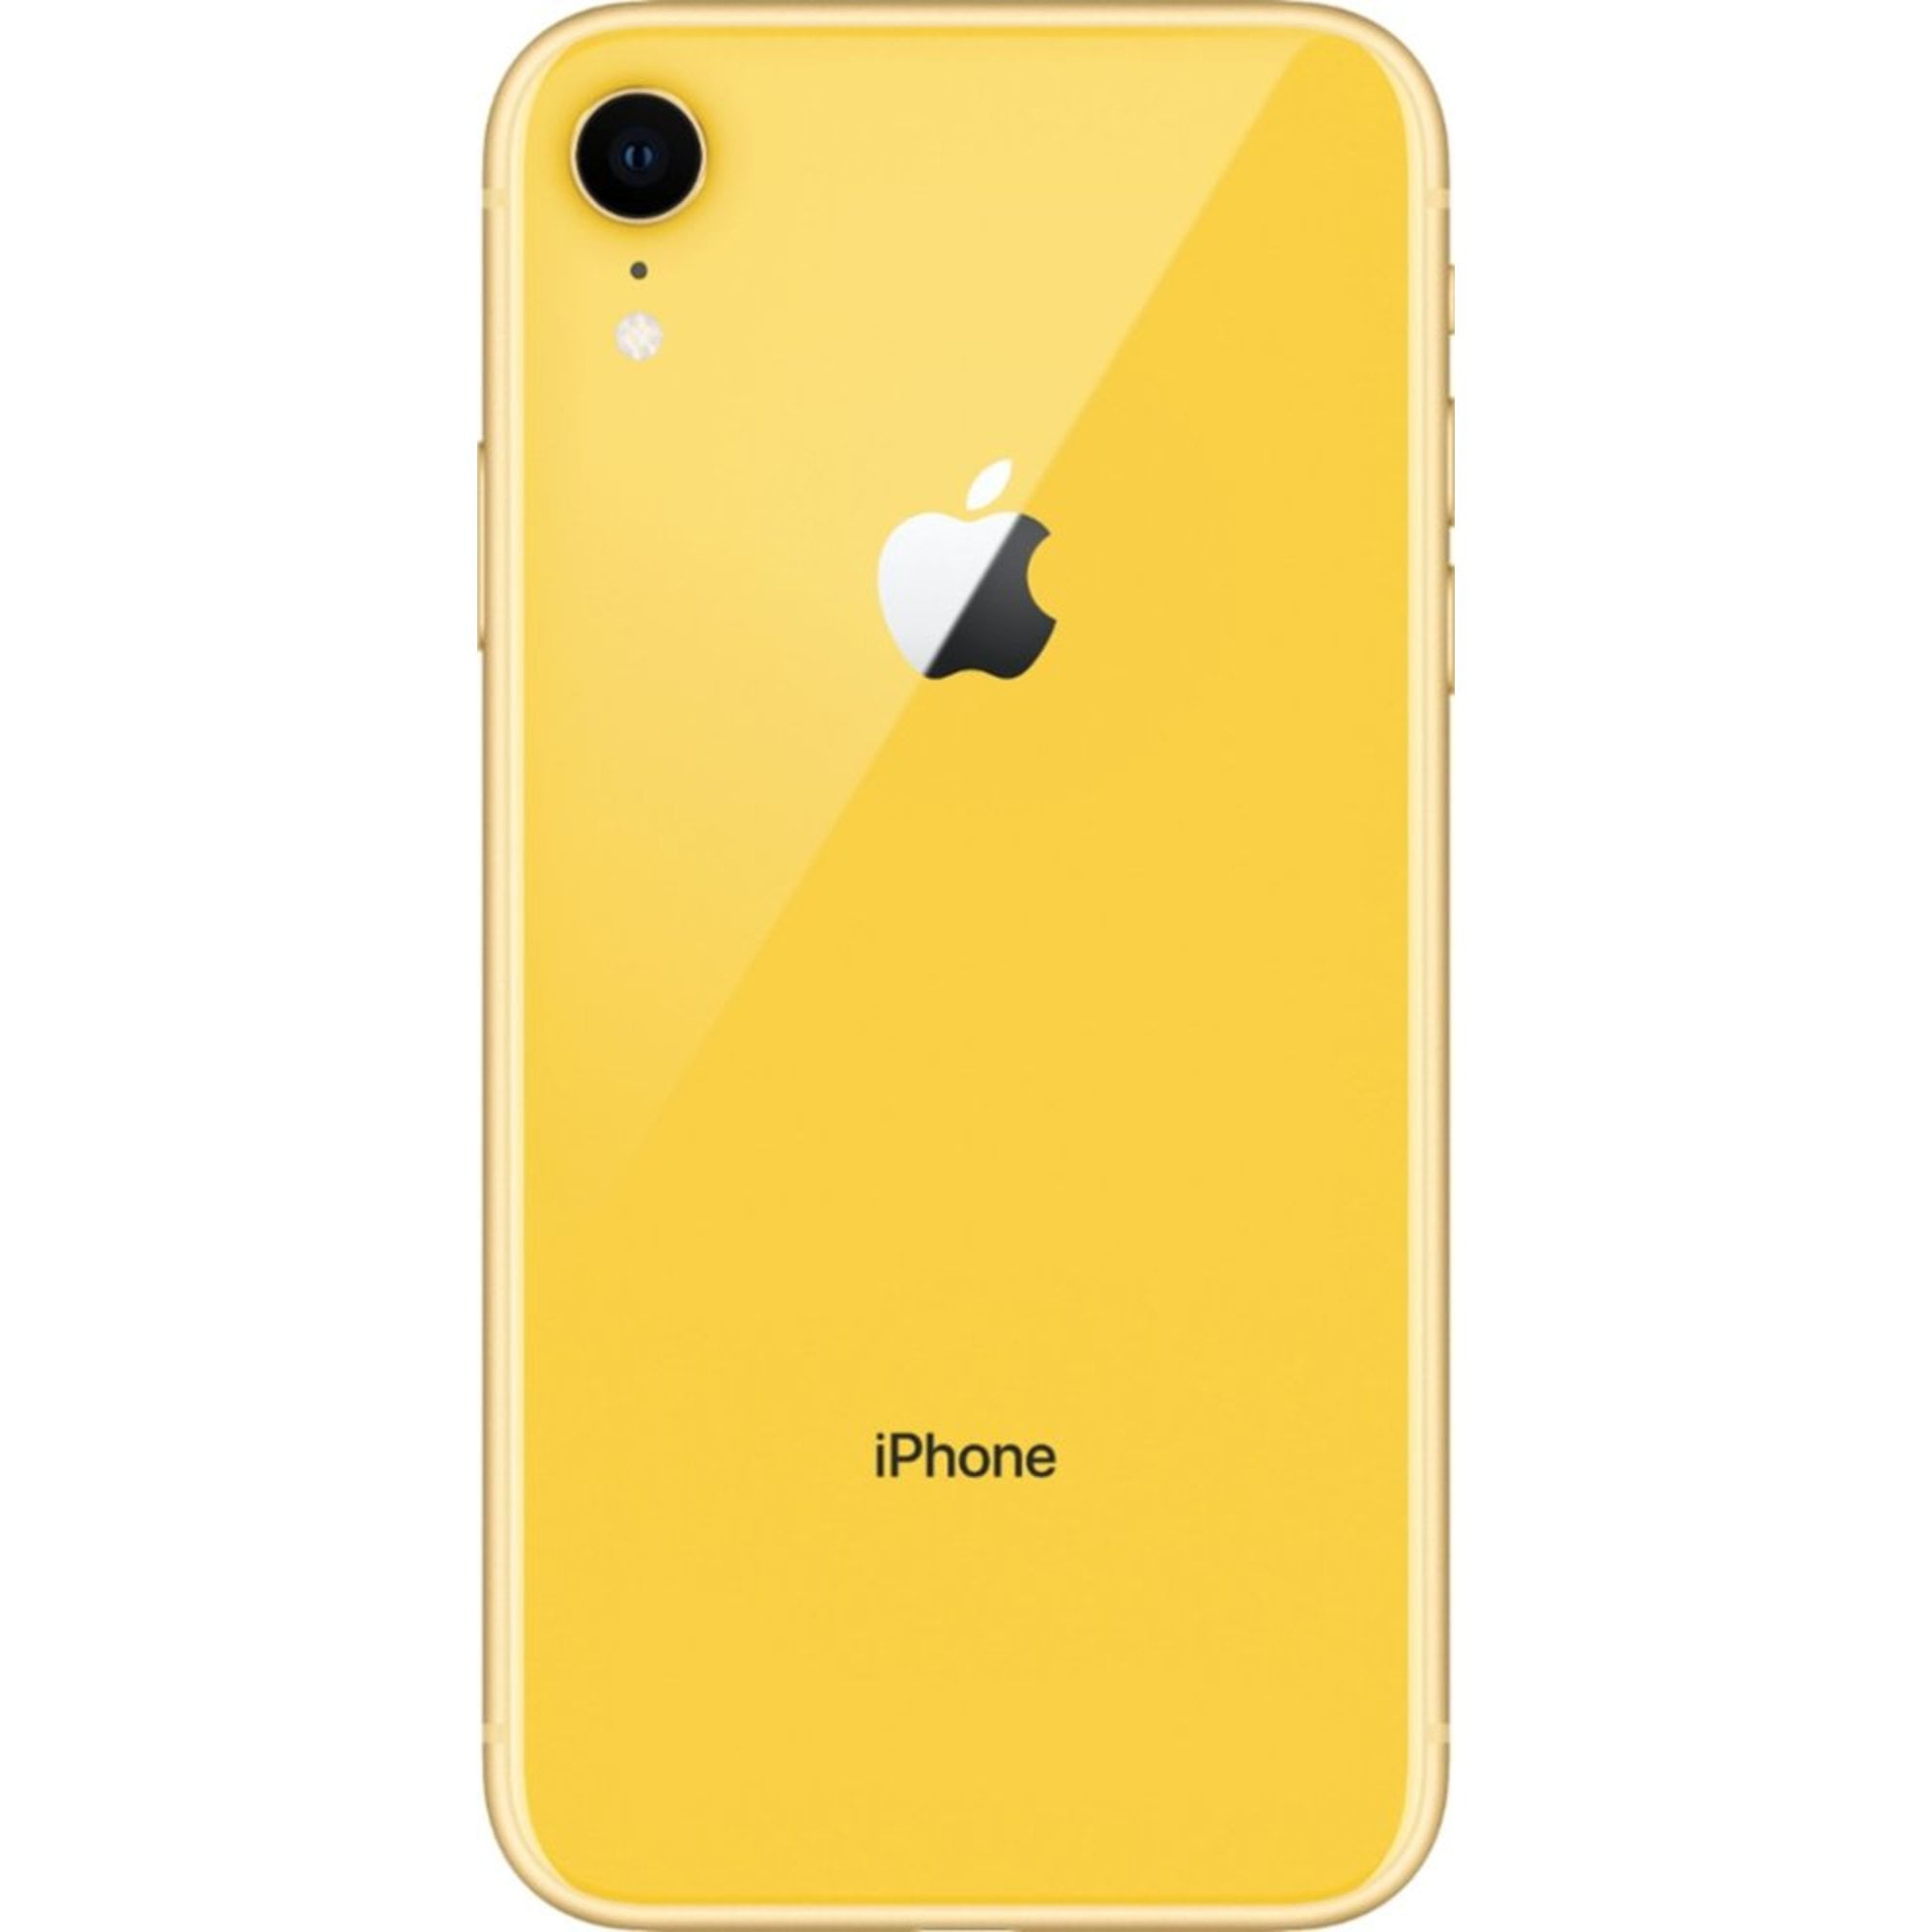 Pre-Owned Apple iPhone XR - Carrier Unlocked - 64 GB YELLOW (Fair